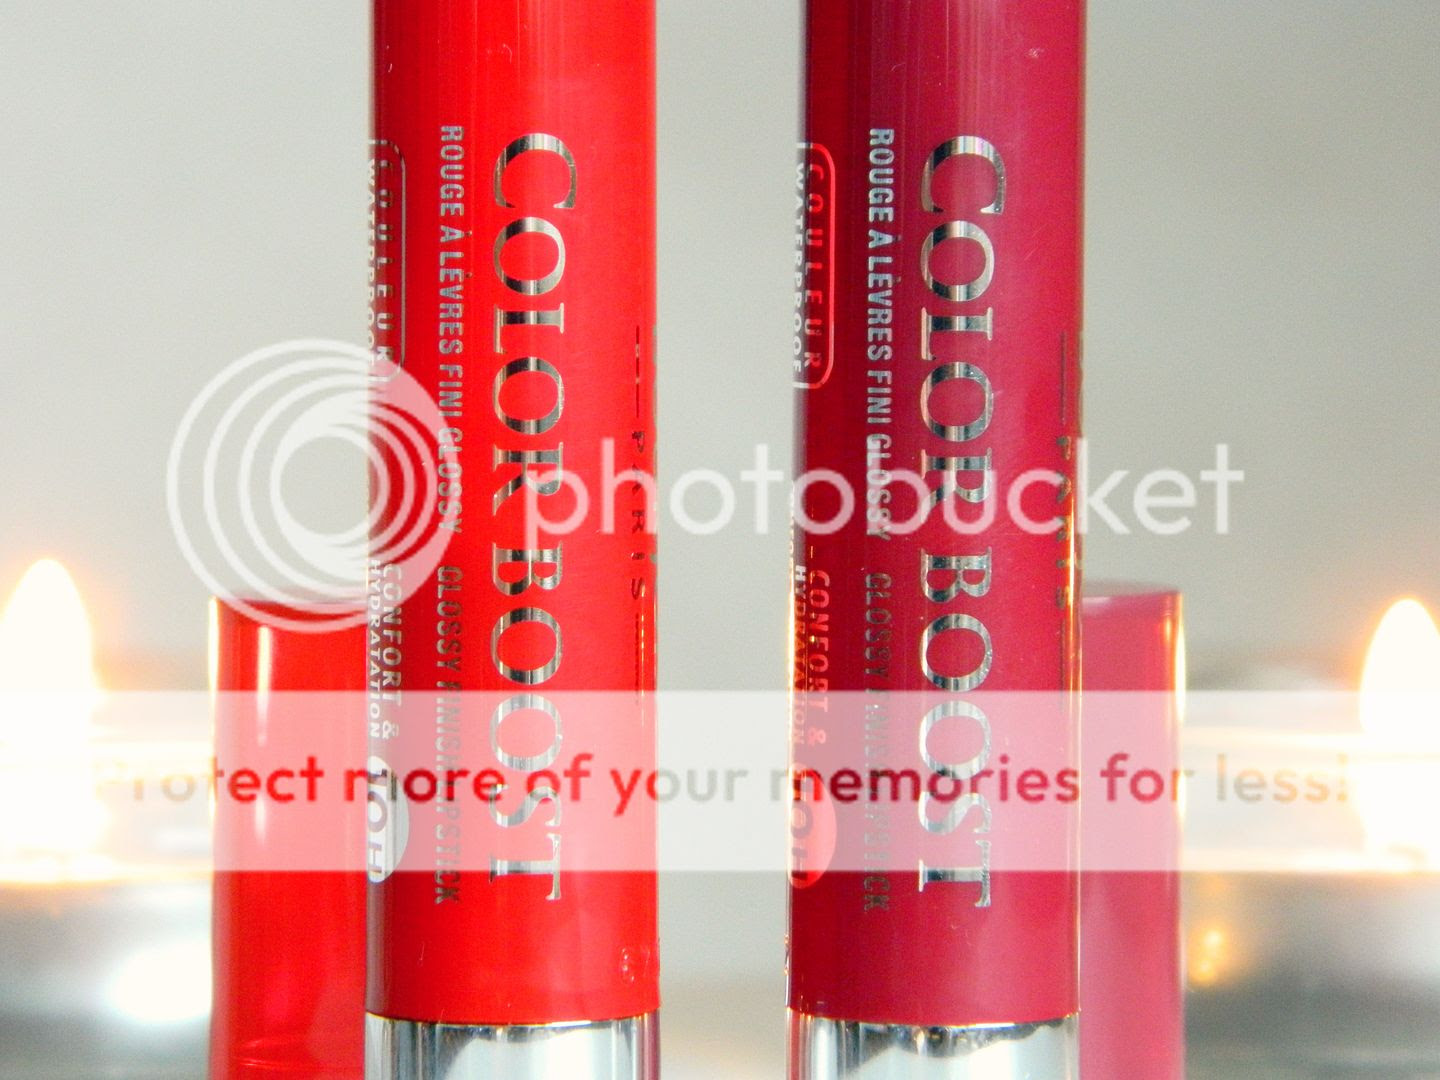 Bourjois Color Boost Lip Crayons Autumn Edition Red Island Plum Russian Bullet Review Belle-amie UK Beauty Fashion Lifestyle Blog